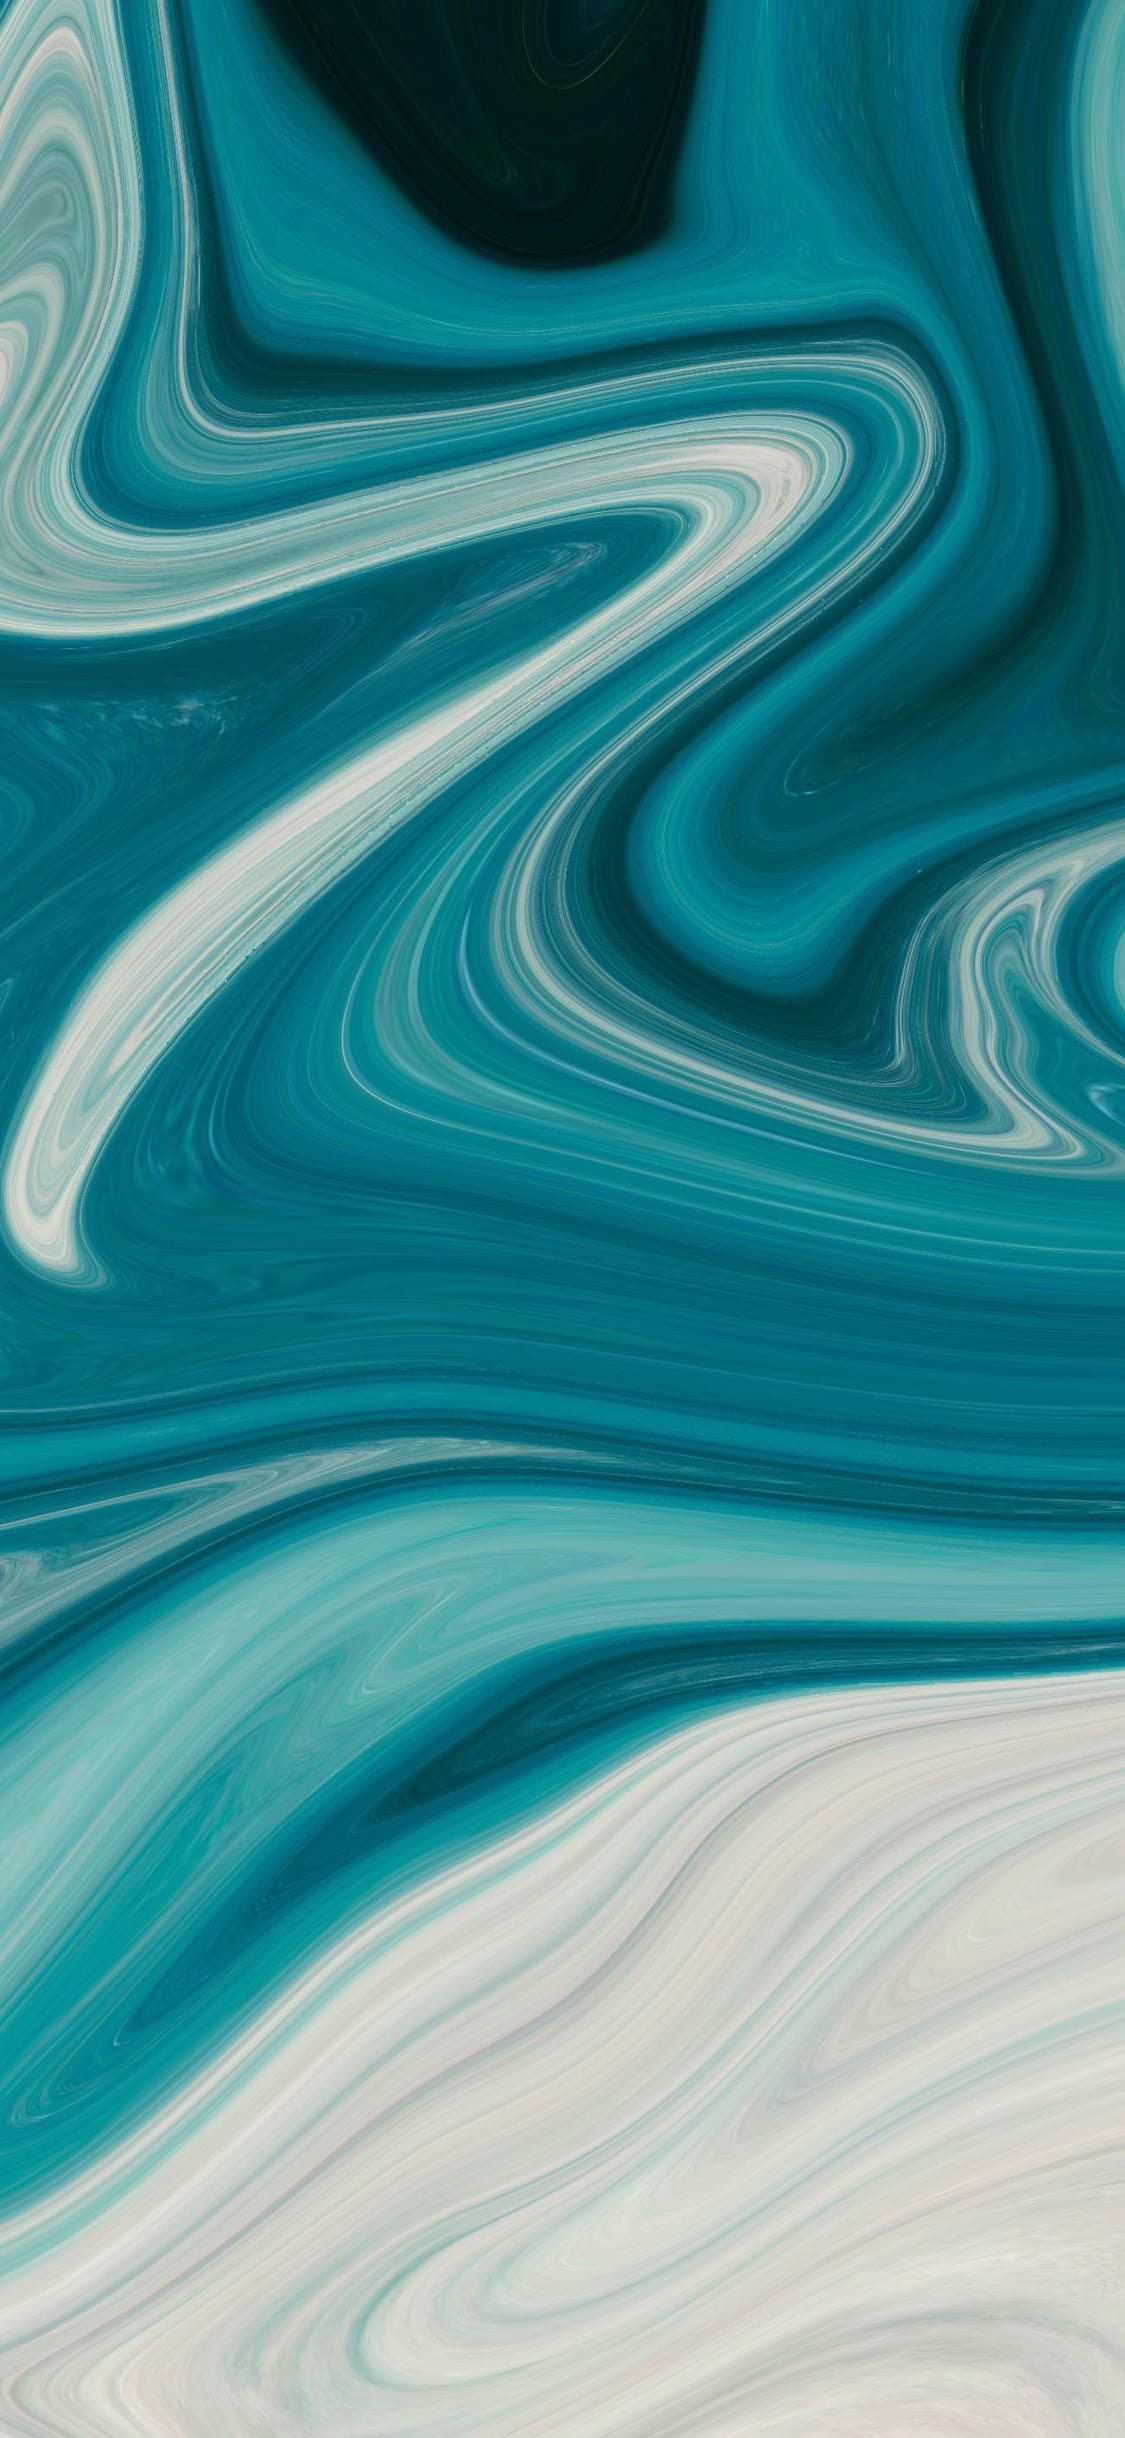 iOS Wallpapers